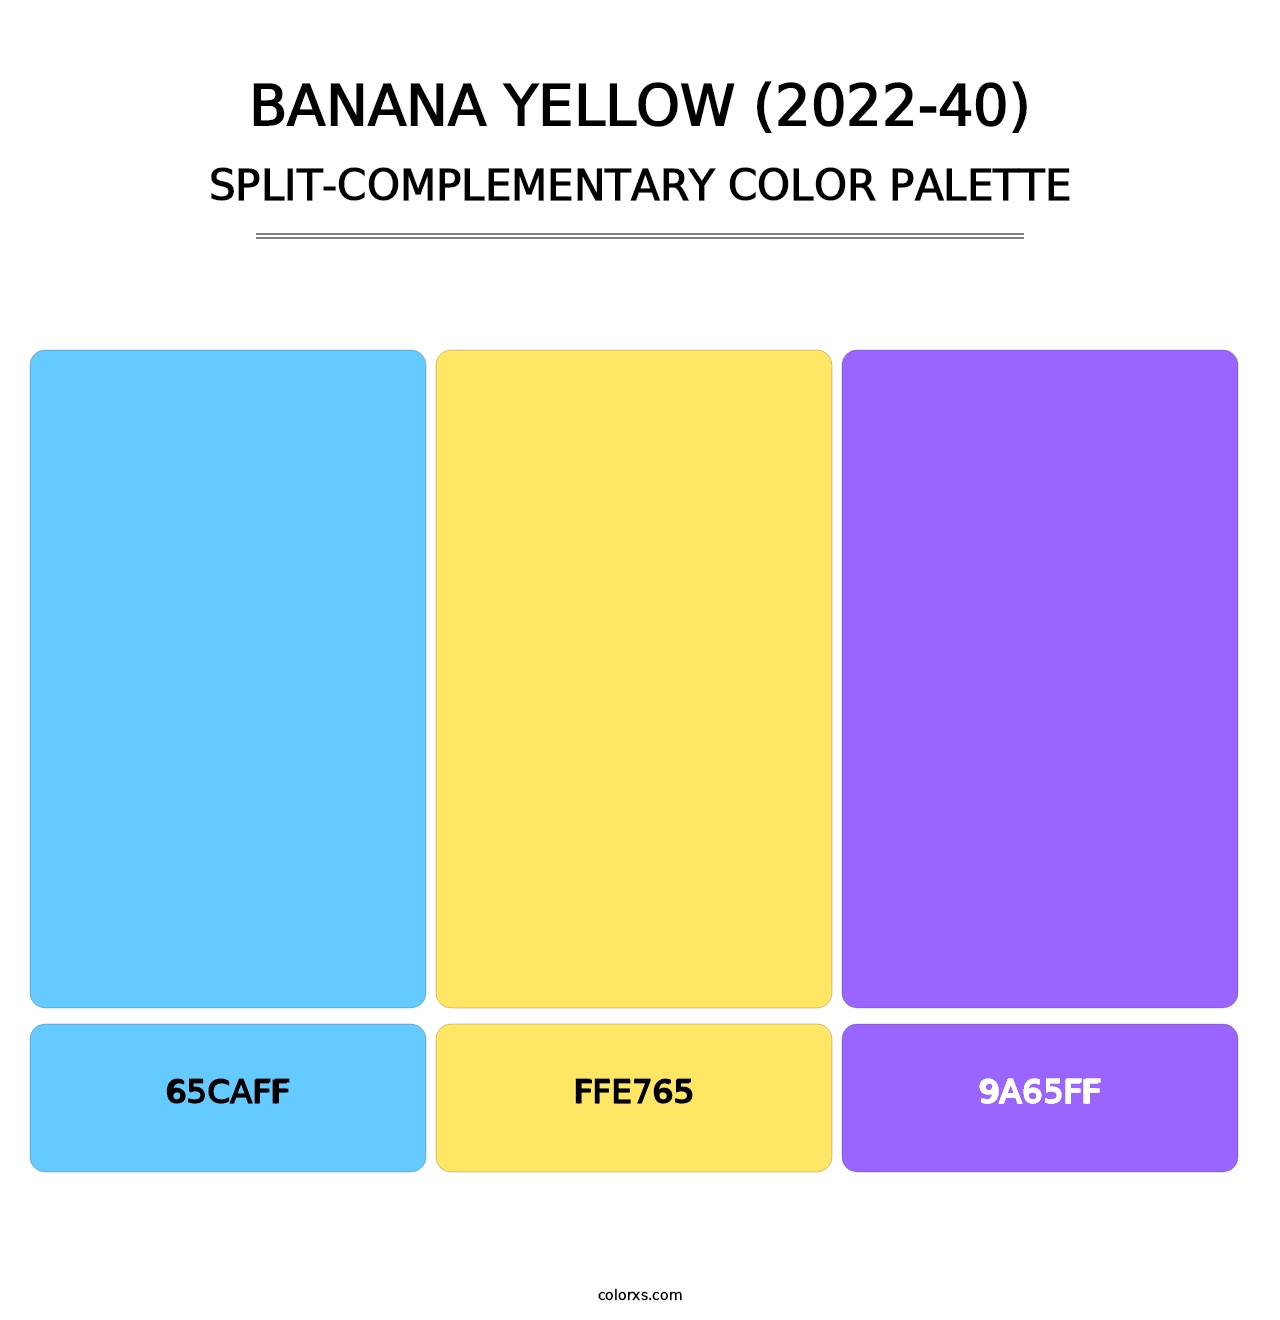 Banana Yellow (2022-40) - Split-Complementary Color Palette